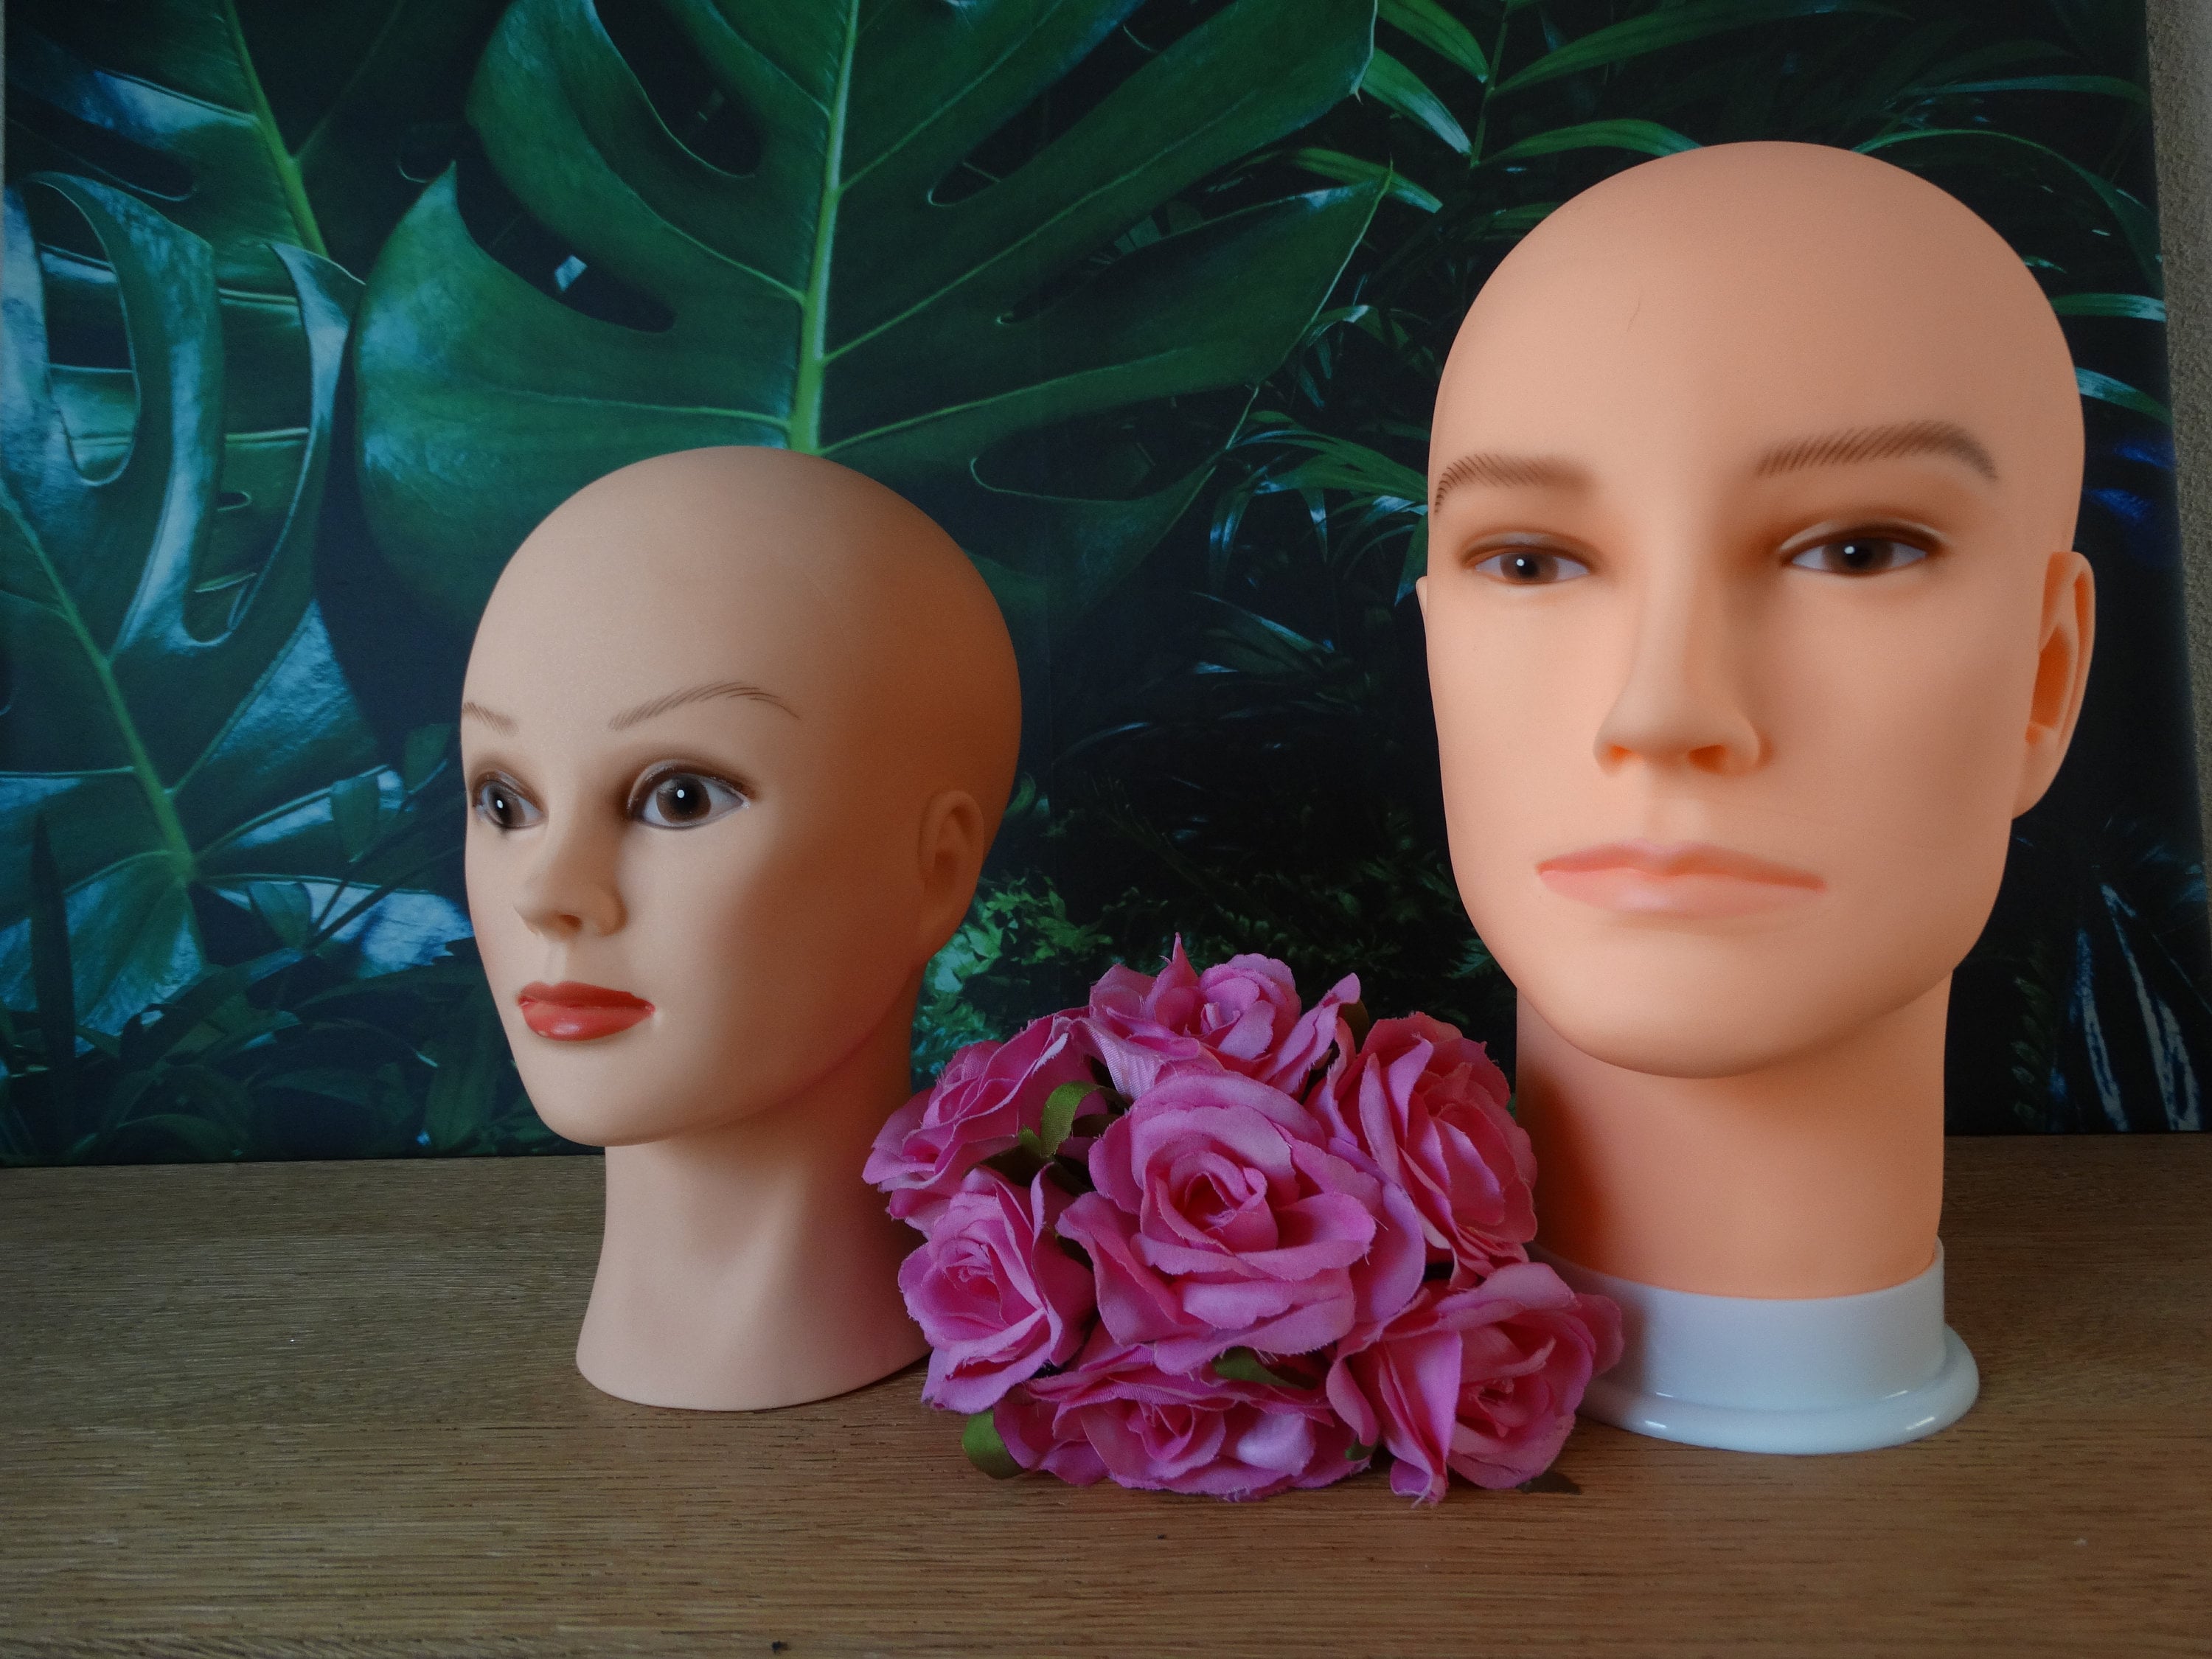 Mannequin Head Rubber Male - Taylor Maid